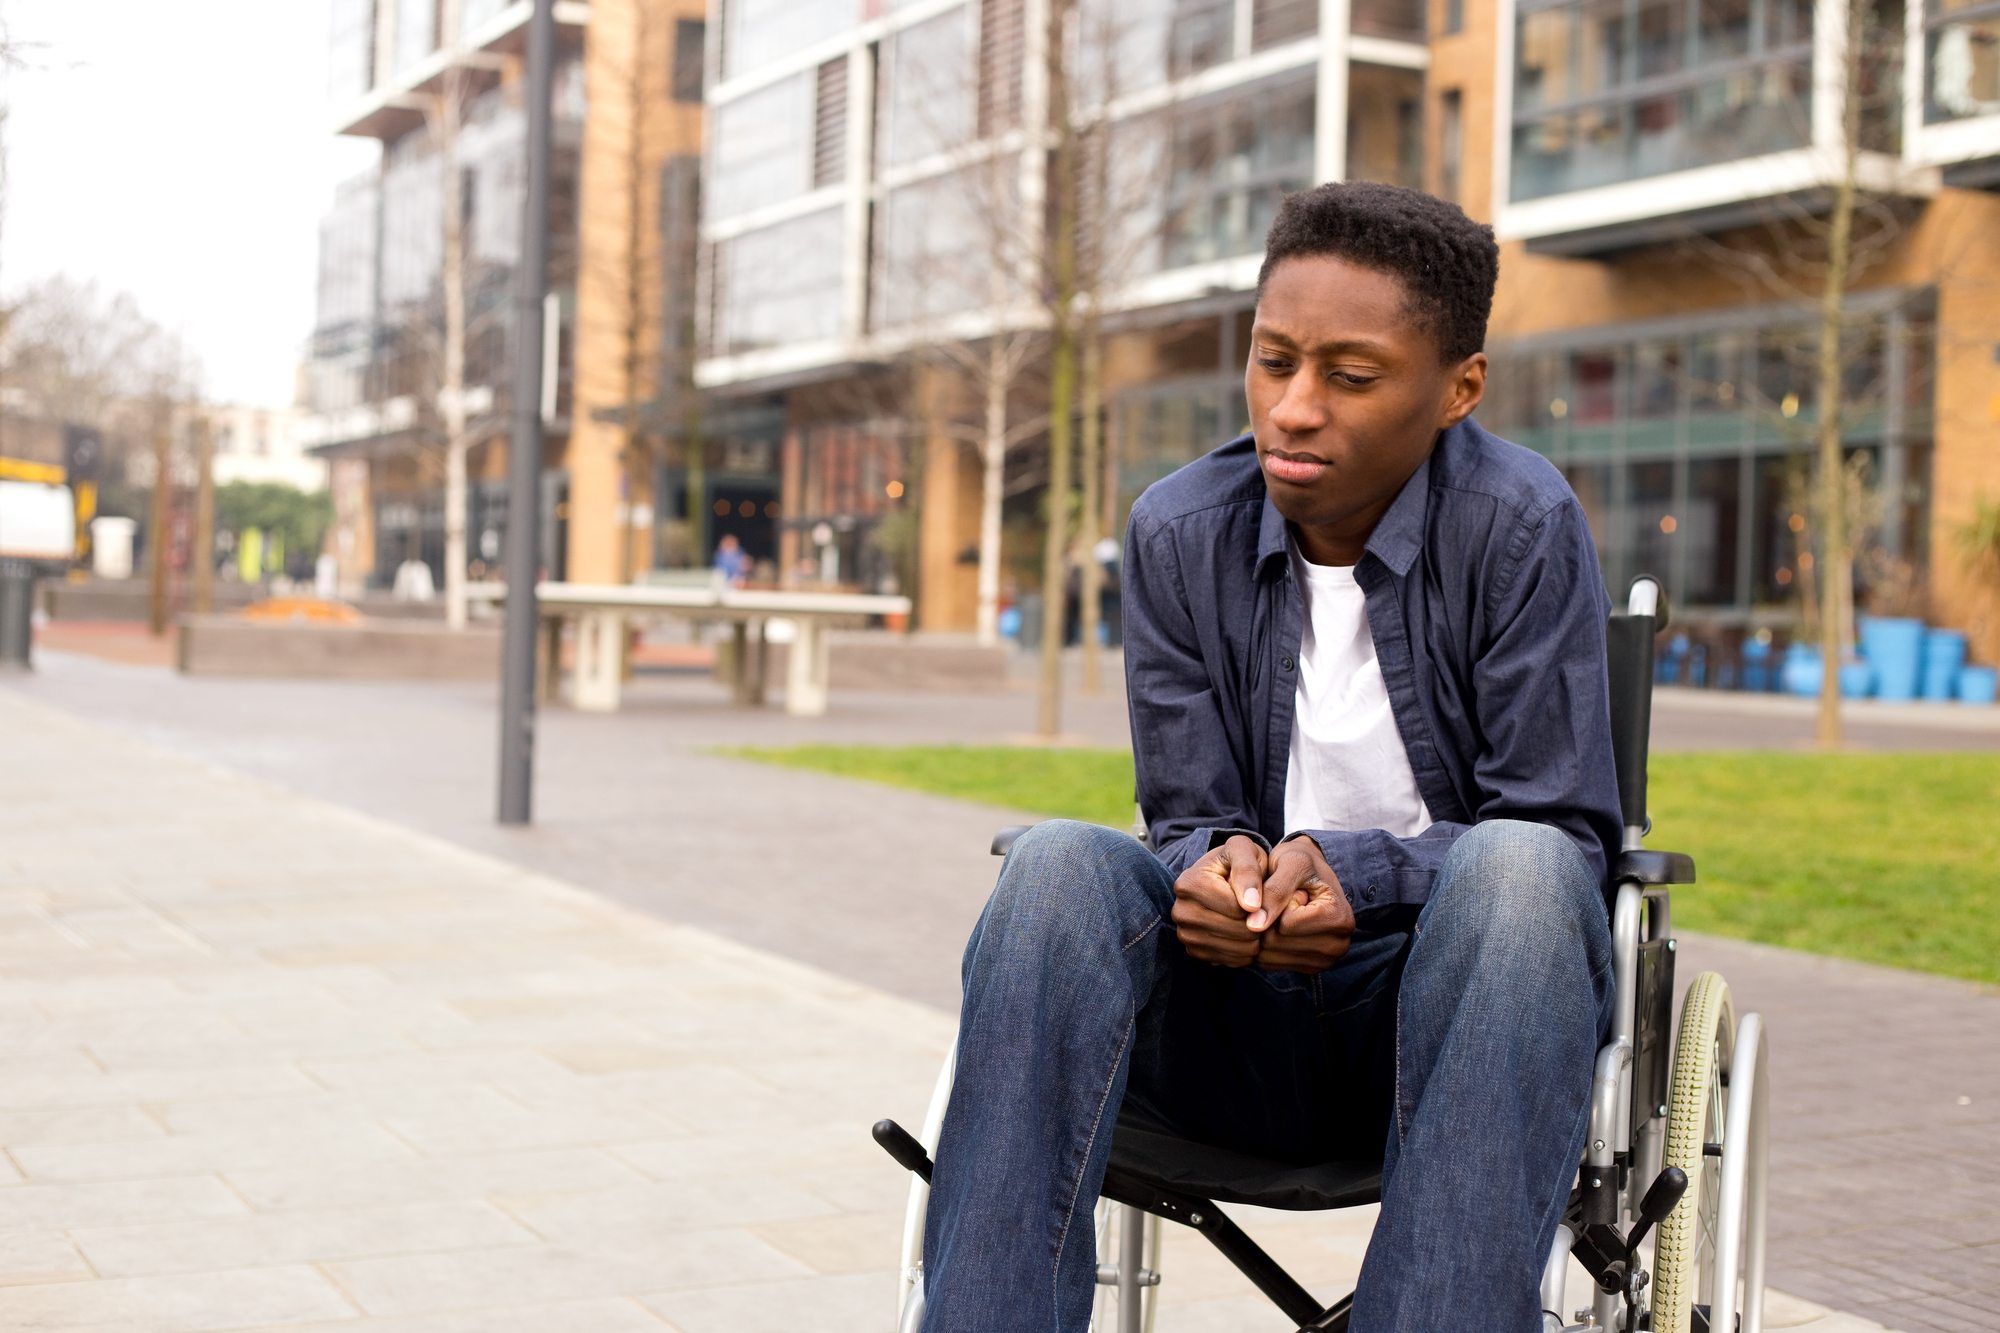 Young man sits in wheelchair on sidewalk